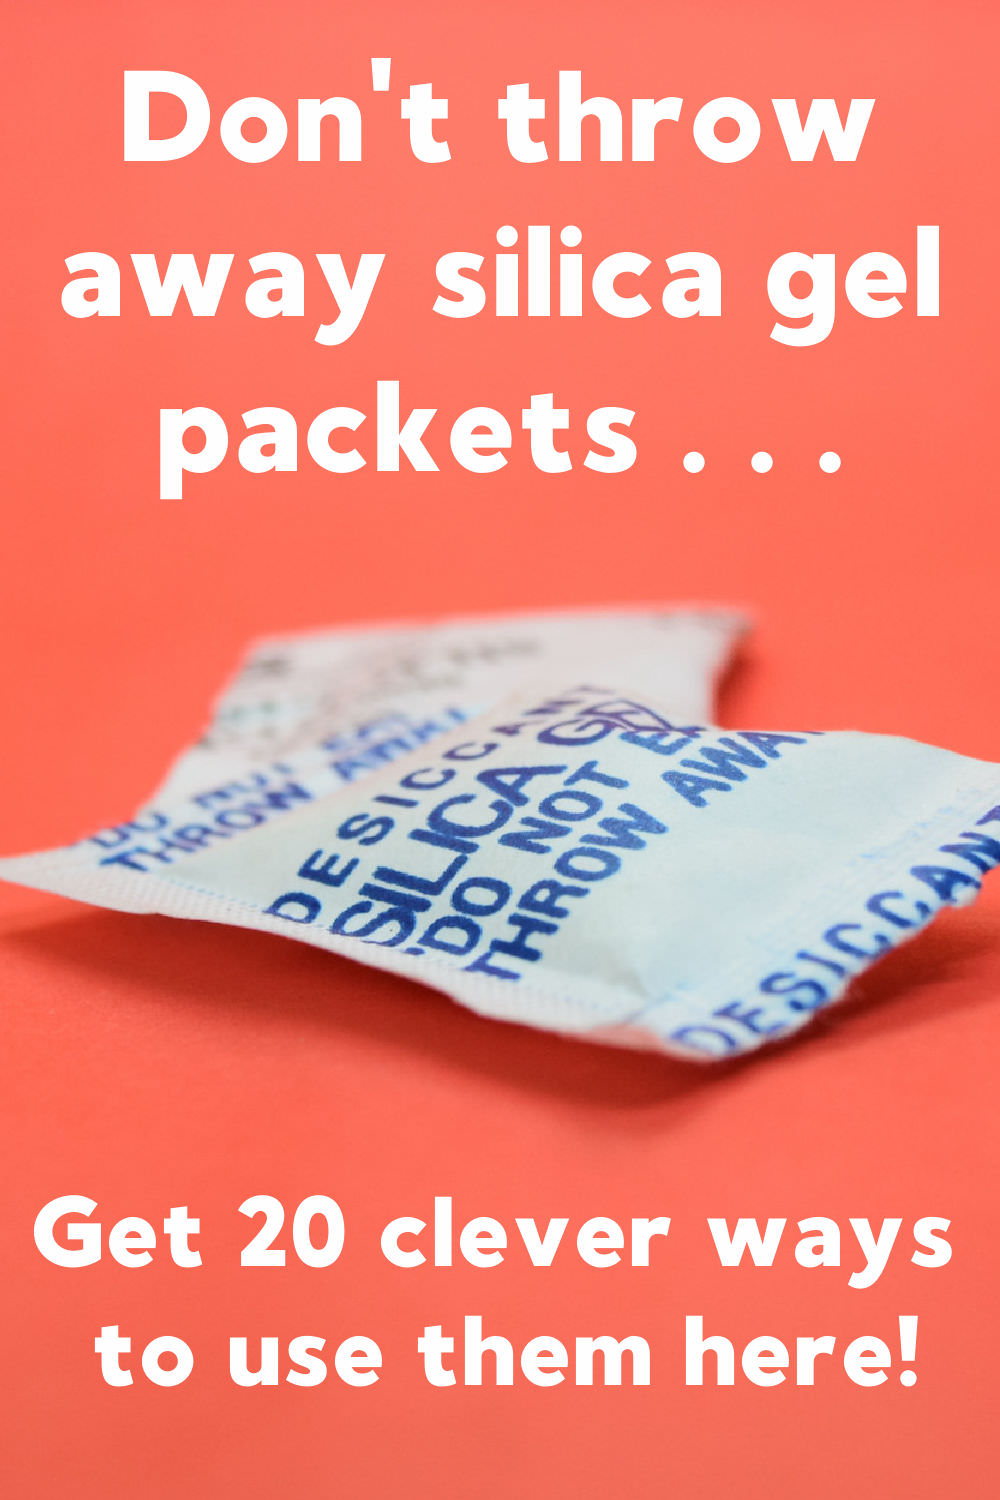 Silica Gel Uses: 19 Practical Ways To Use Silica Gel Packets